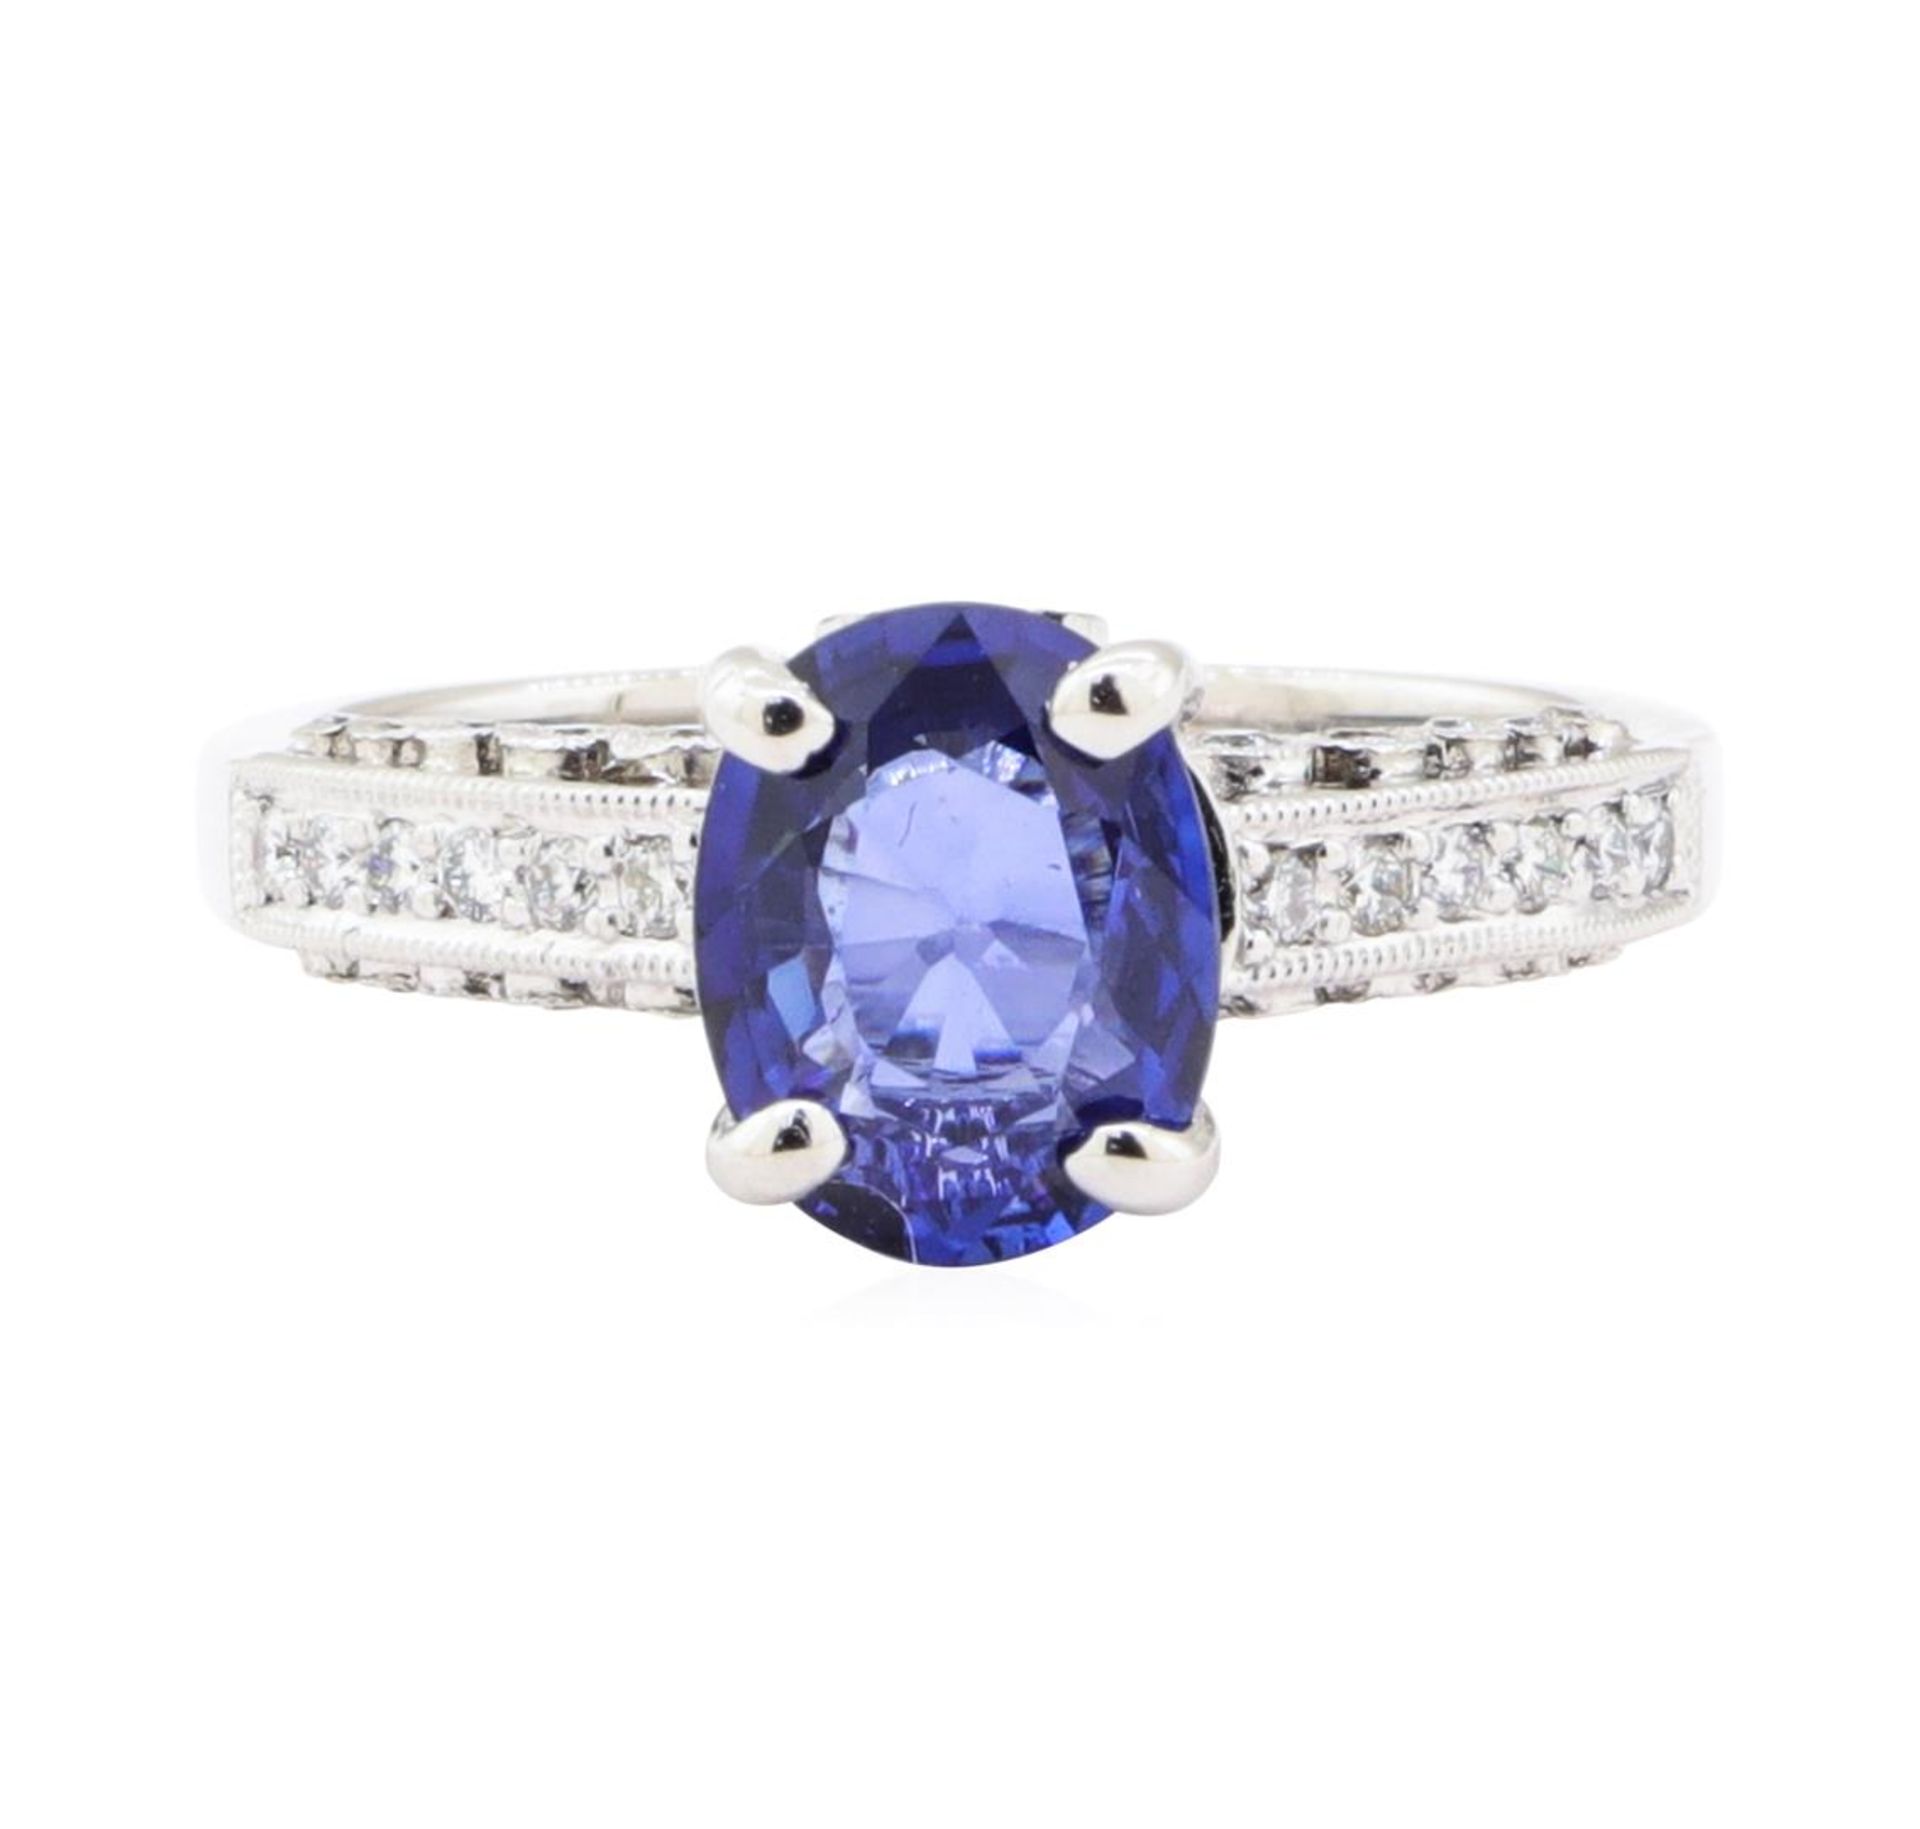 2.16 ctw Sapphire And Diamond Ring - 18KT White Gold - Image 2 of 5